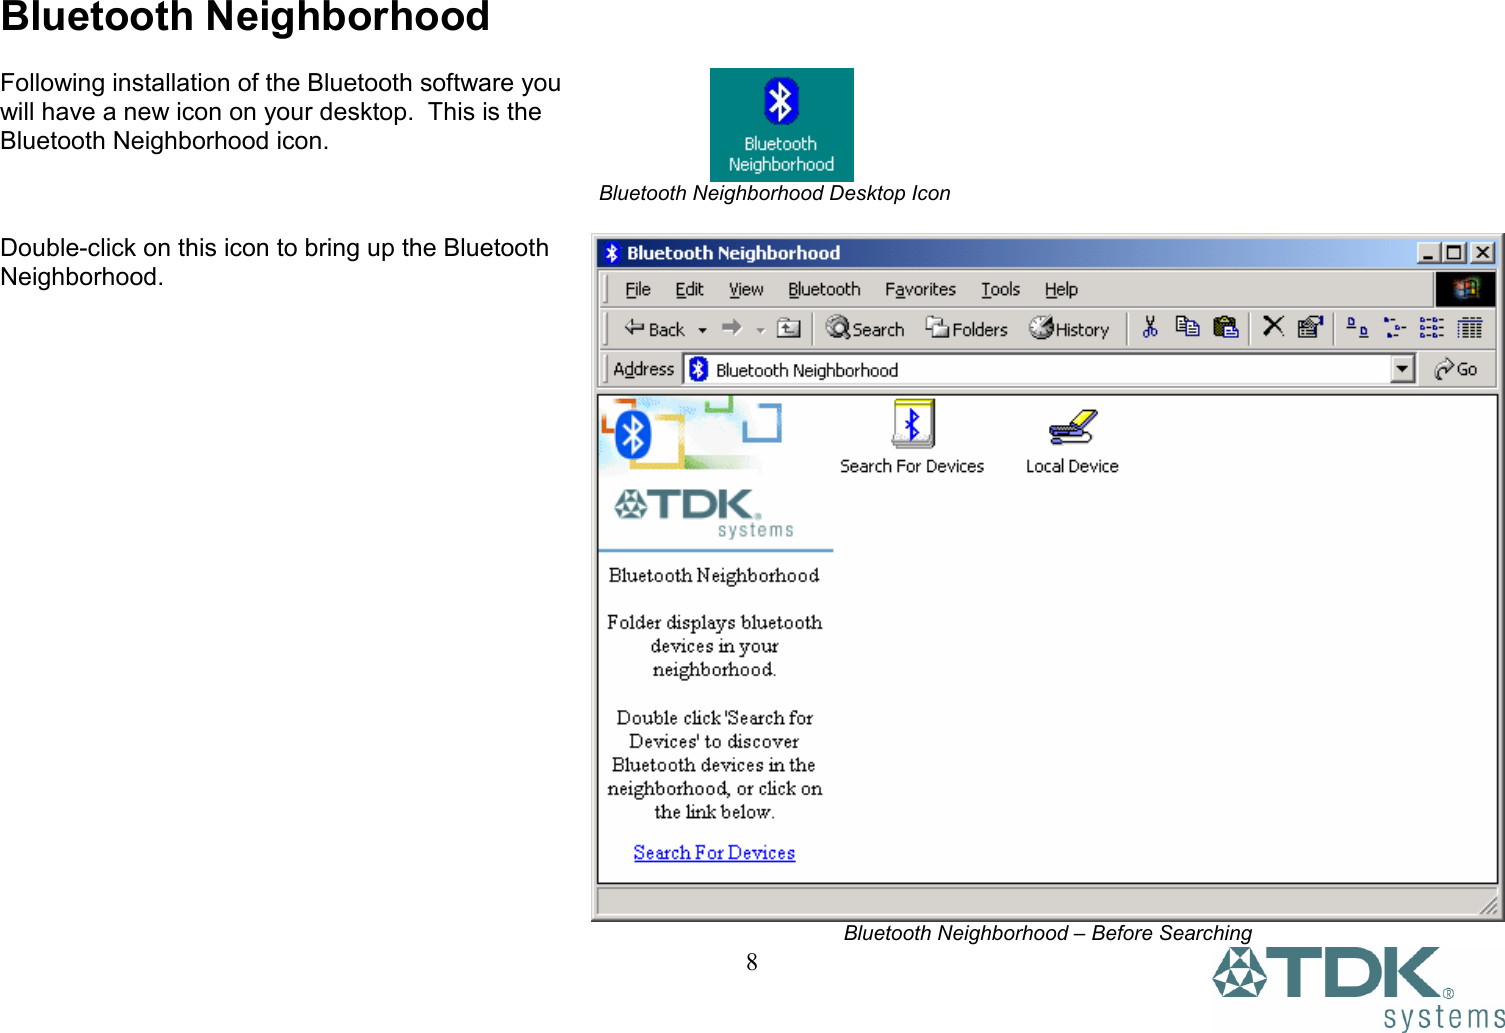   8Bluetooth Neighborhood  Following installation of the Bluetooth software you will have a new icon on your desktop.  This is the Bluetooth Neighborhood icon.                   Bluetooth Neighborhood Desktop Icon  Double-click on this icon to bring up the Bluetooth Neighborhood. Bluetooth Neighborhood – Before Searching 